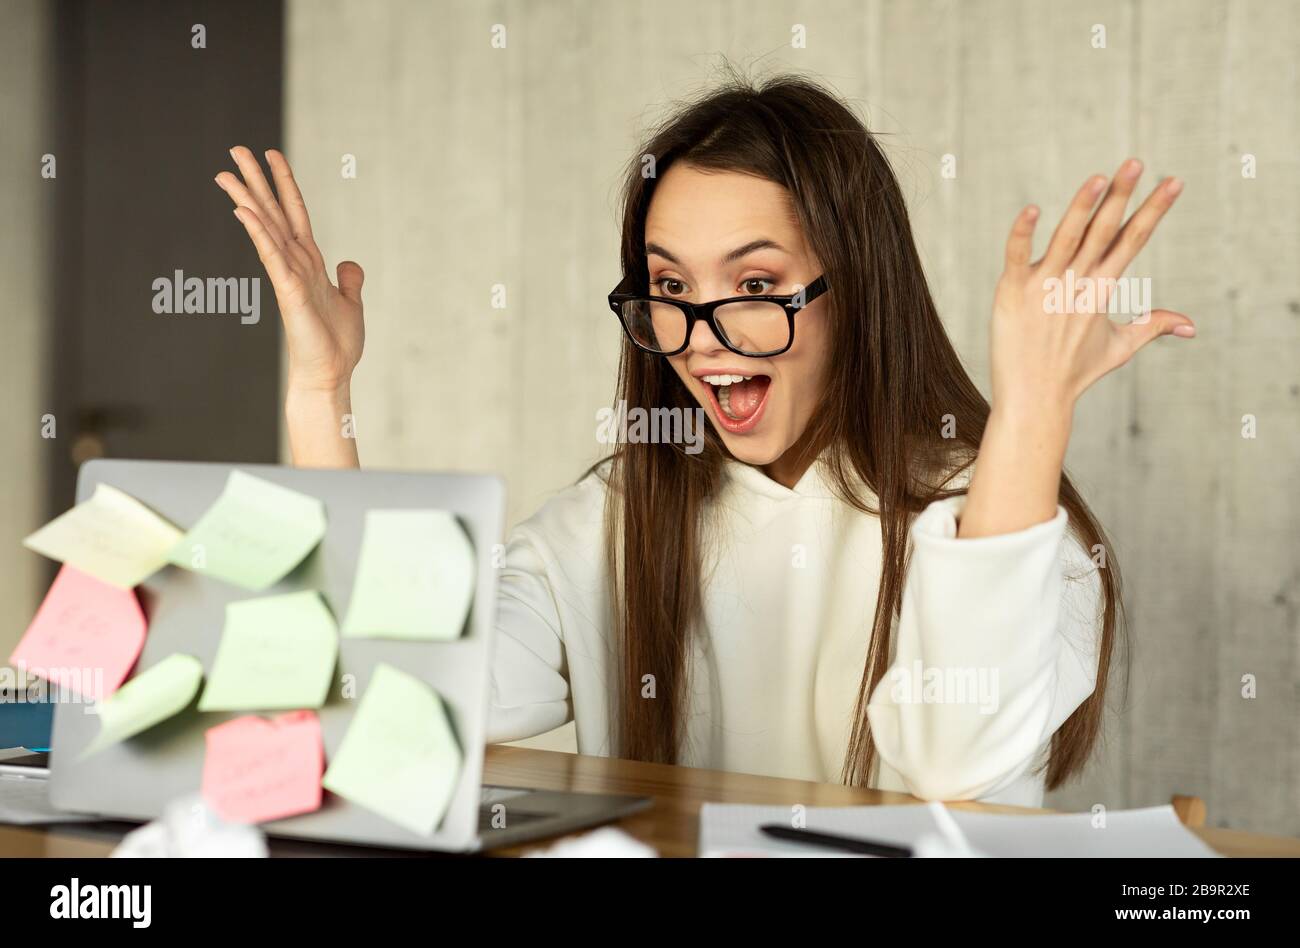 Excited young business woman keeping arms raised Stock Photo